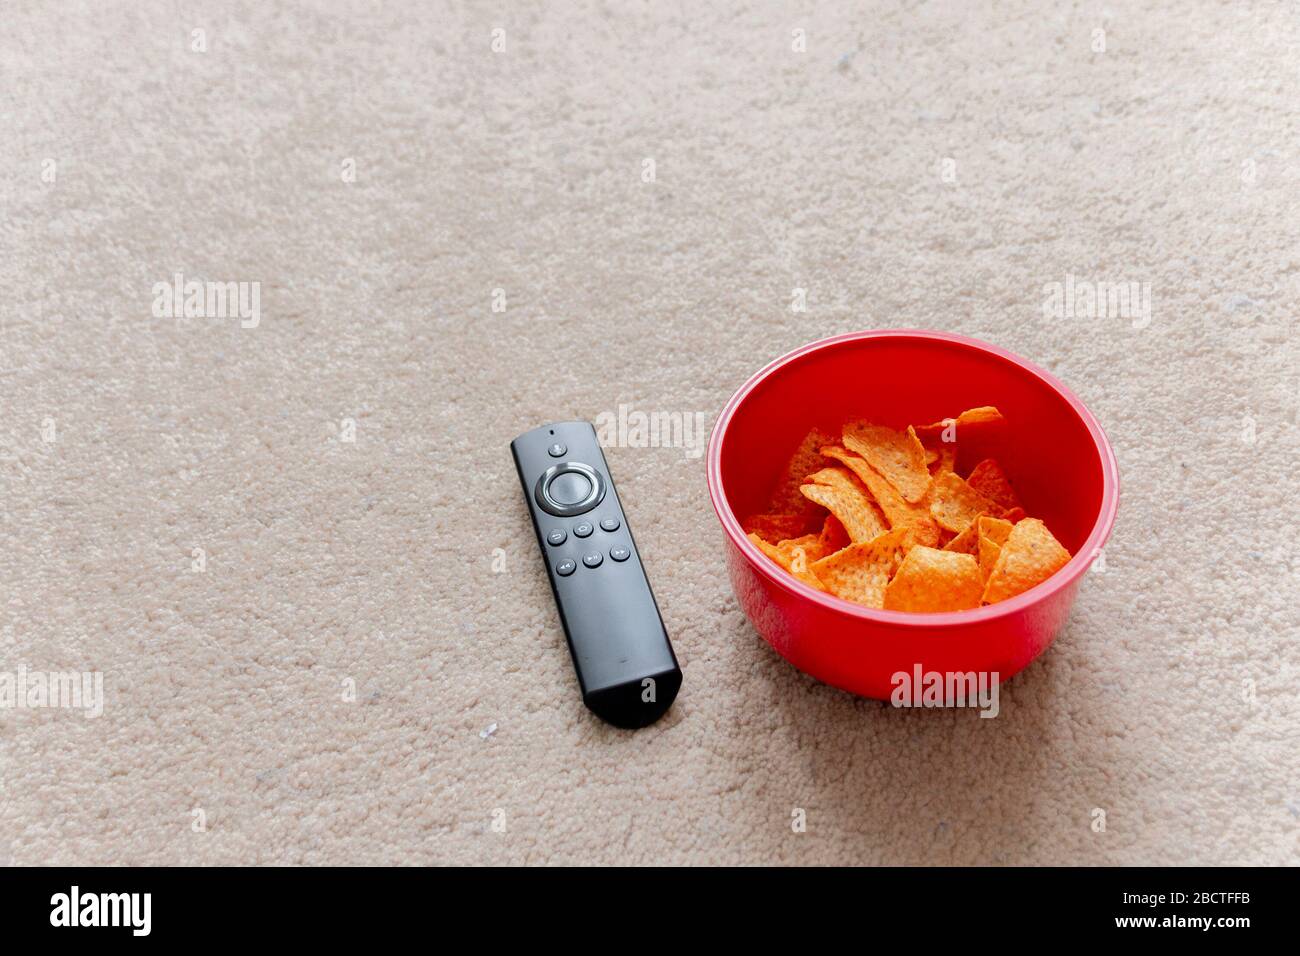 a close up view of a smart tv remote next to a red plastic bowl of chips or crisps on the light coloured carpet Stock Photo